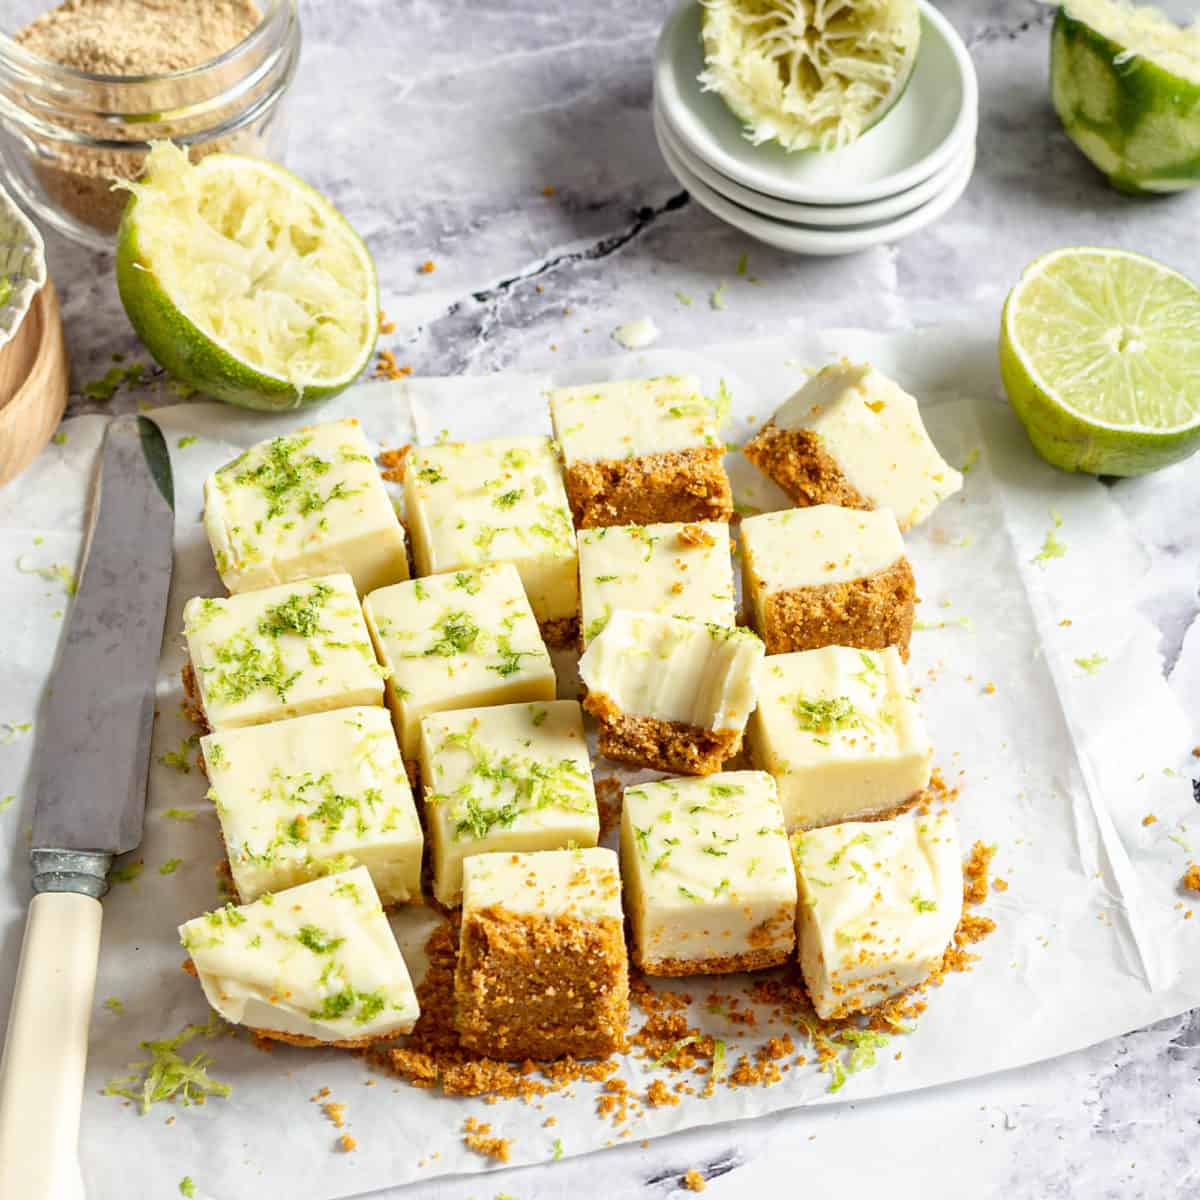 Several slices of key lime fudge laid out on a table.